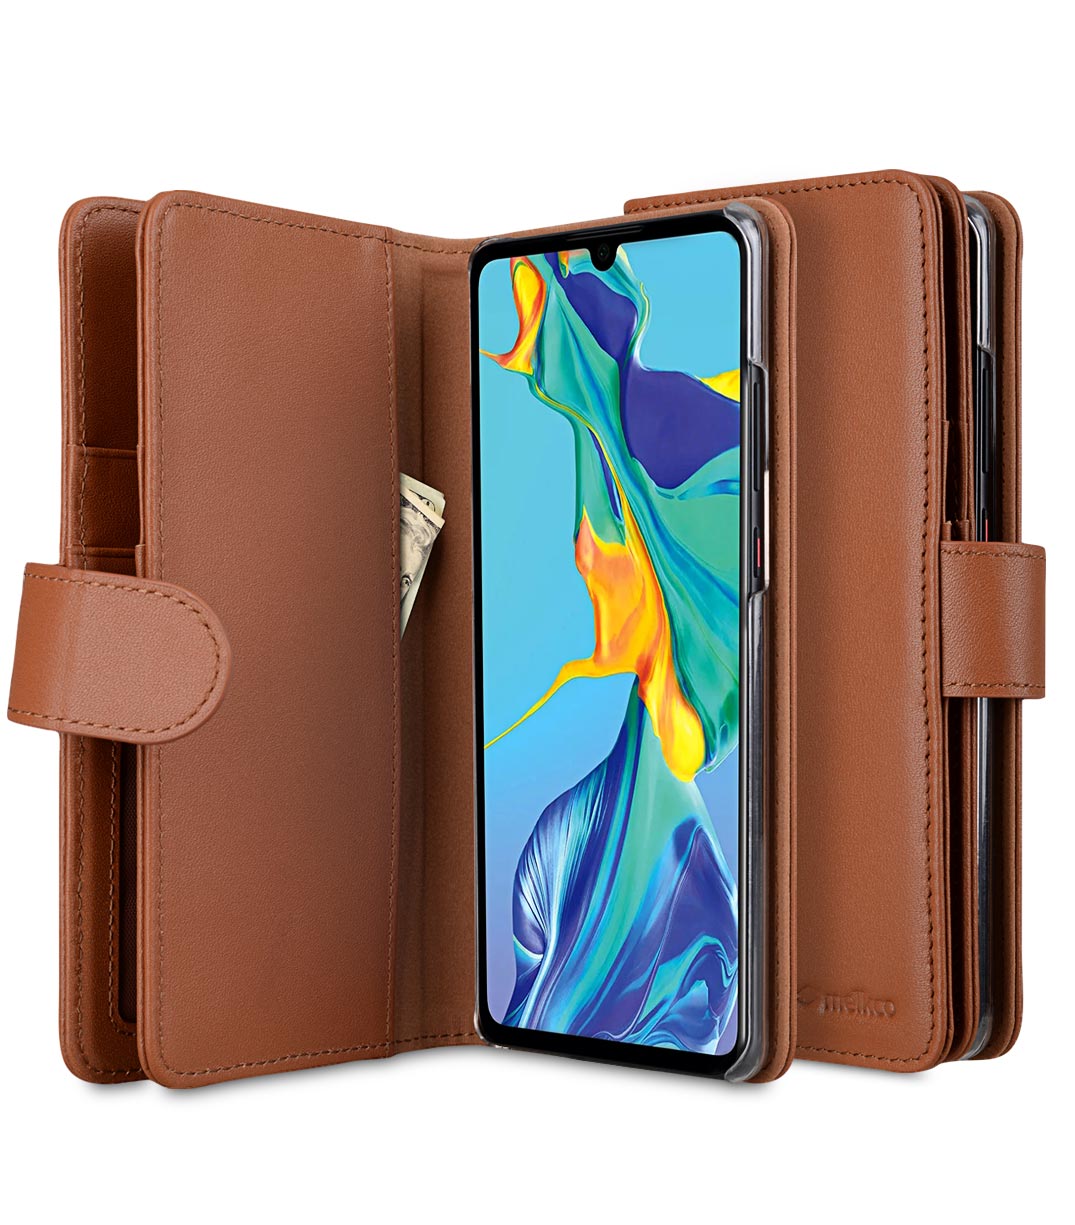 Melkco Wallet Book Series Crazy Horse Premium Leather Wallet Plus Book Type Case for Huawei P30 Pro - ( Brown CH )